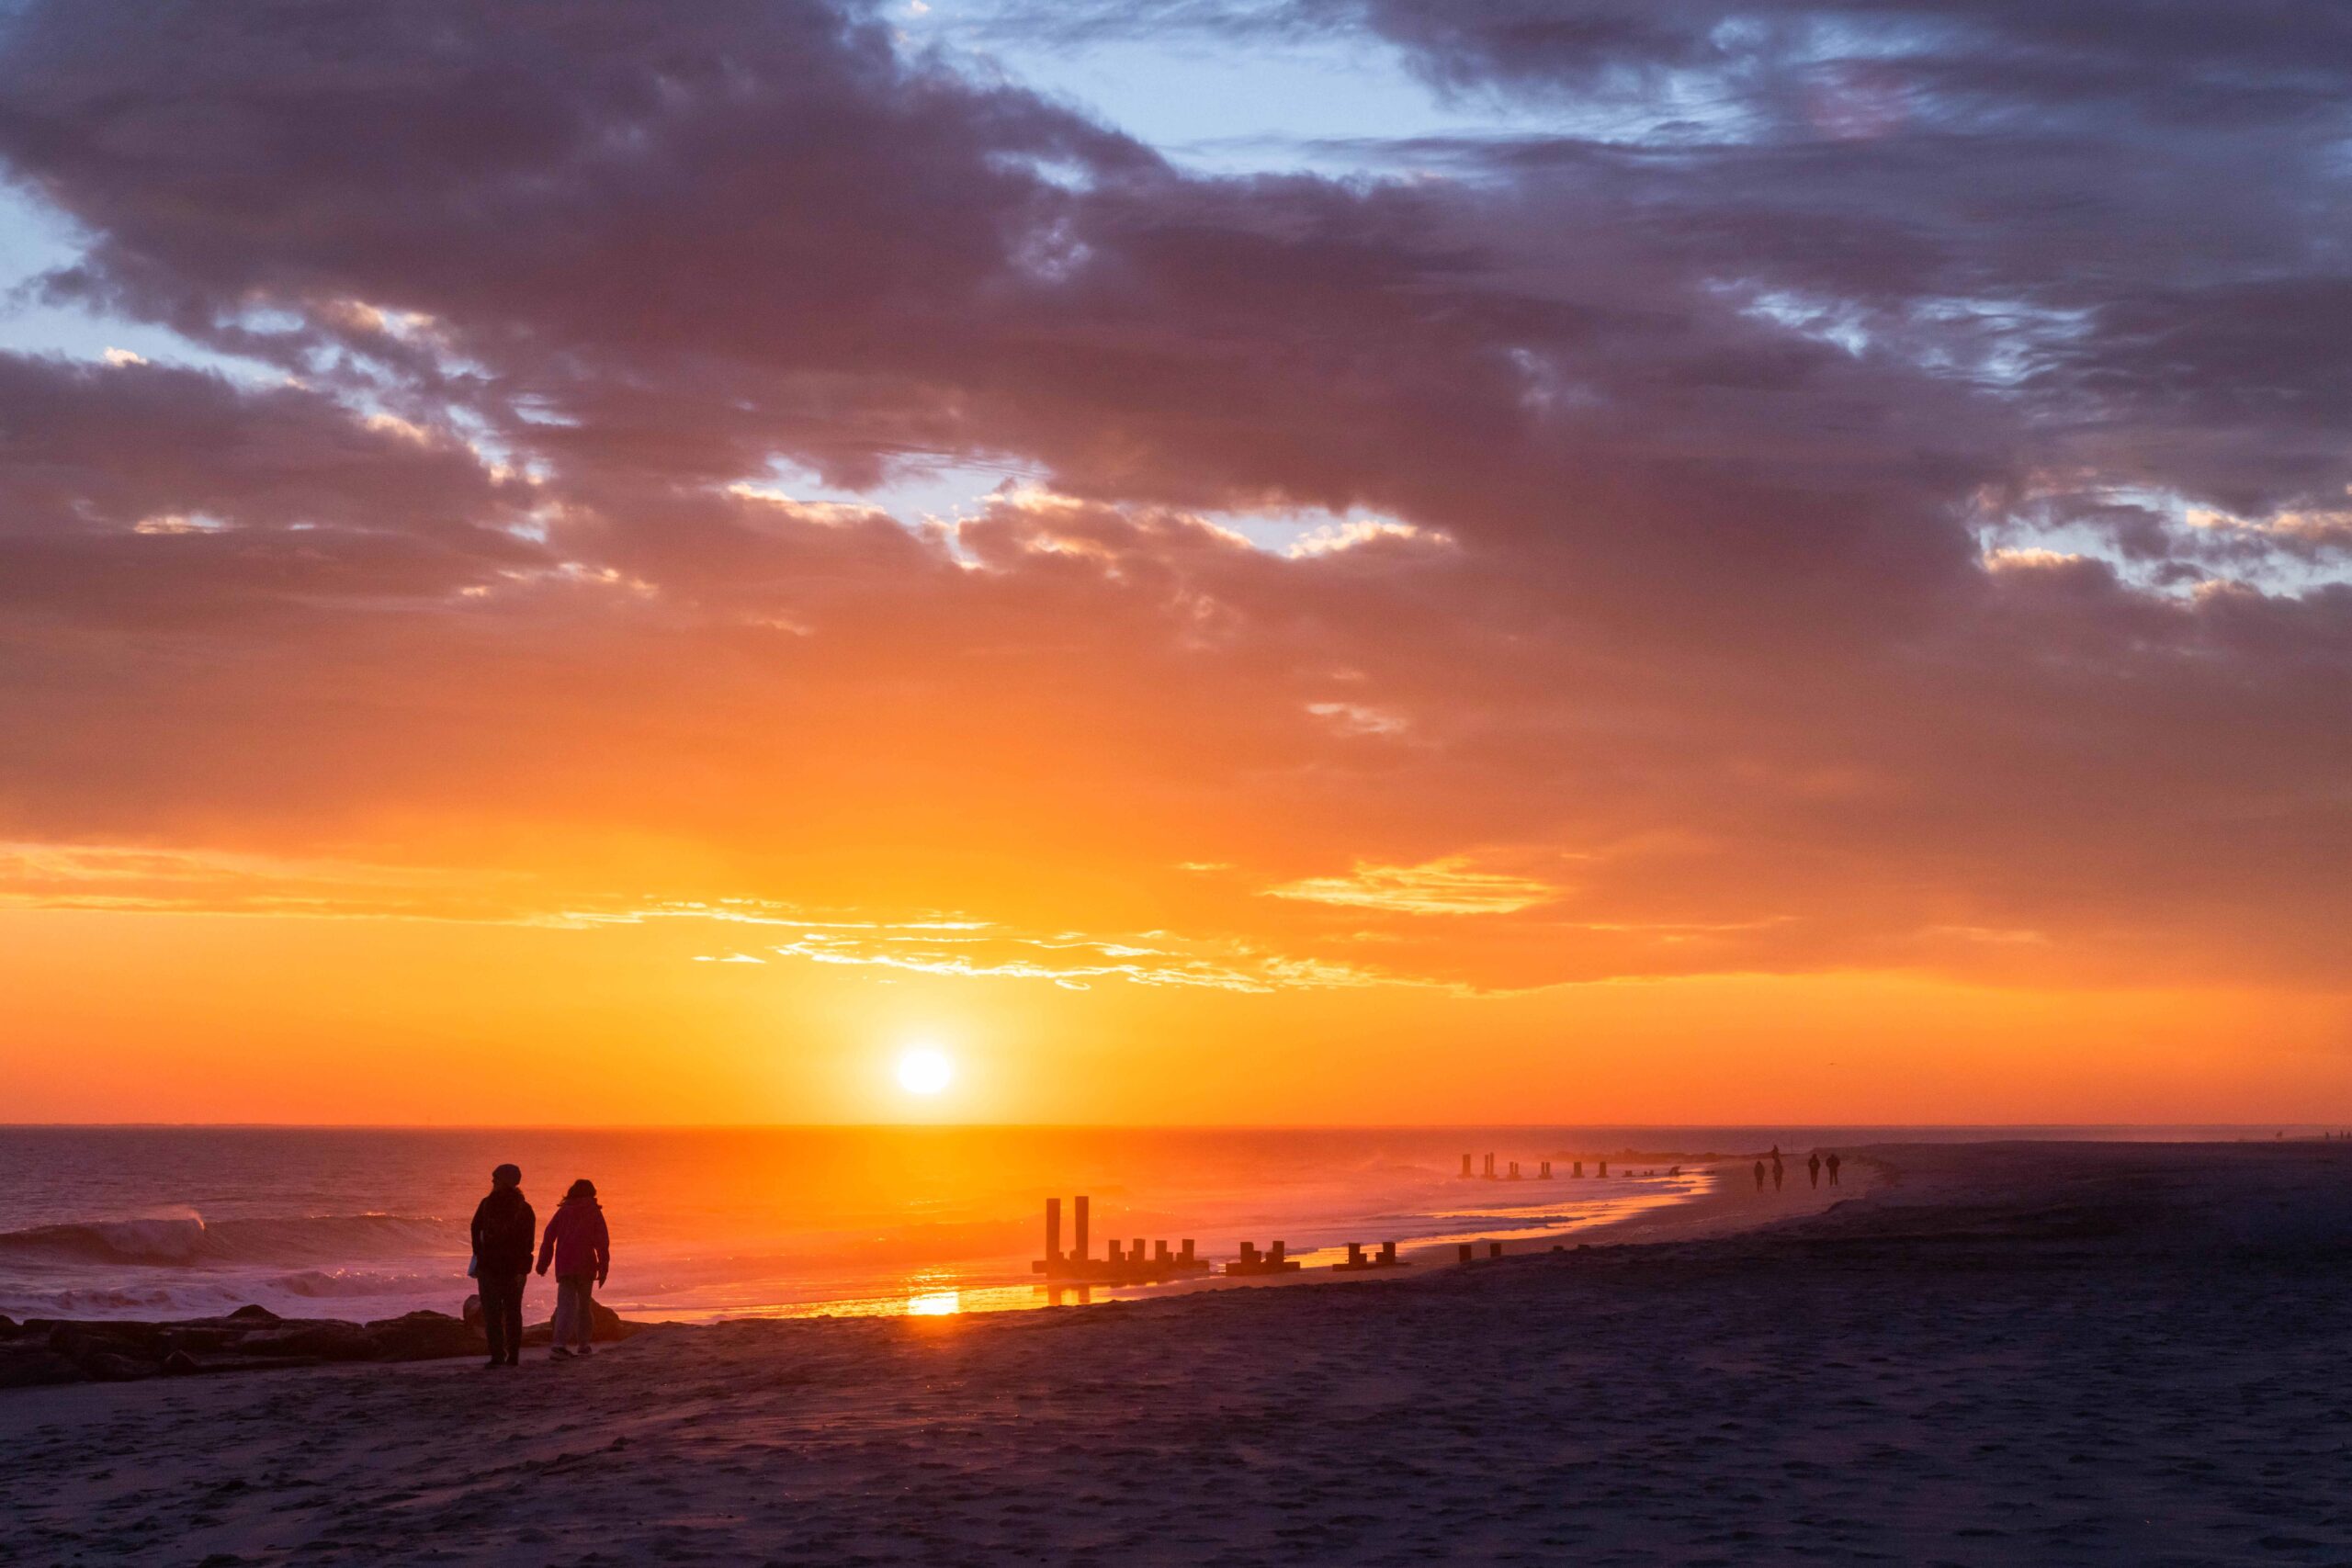 Two people walking on the beach at sunset with an orange, purple, and blue cloud in the sky